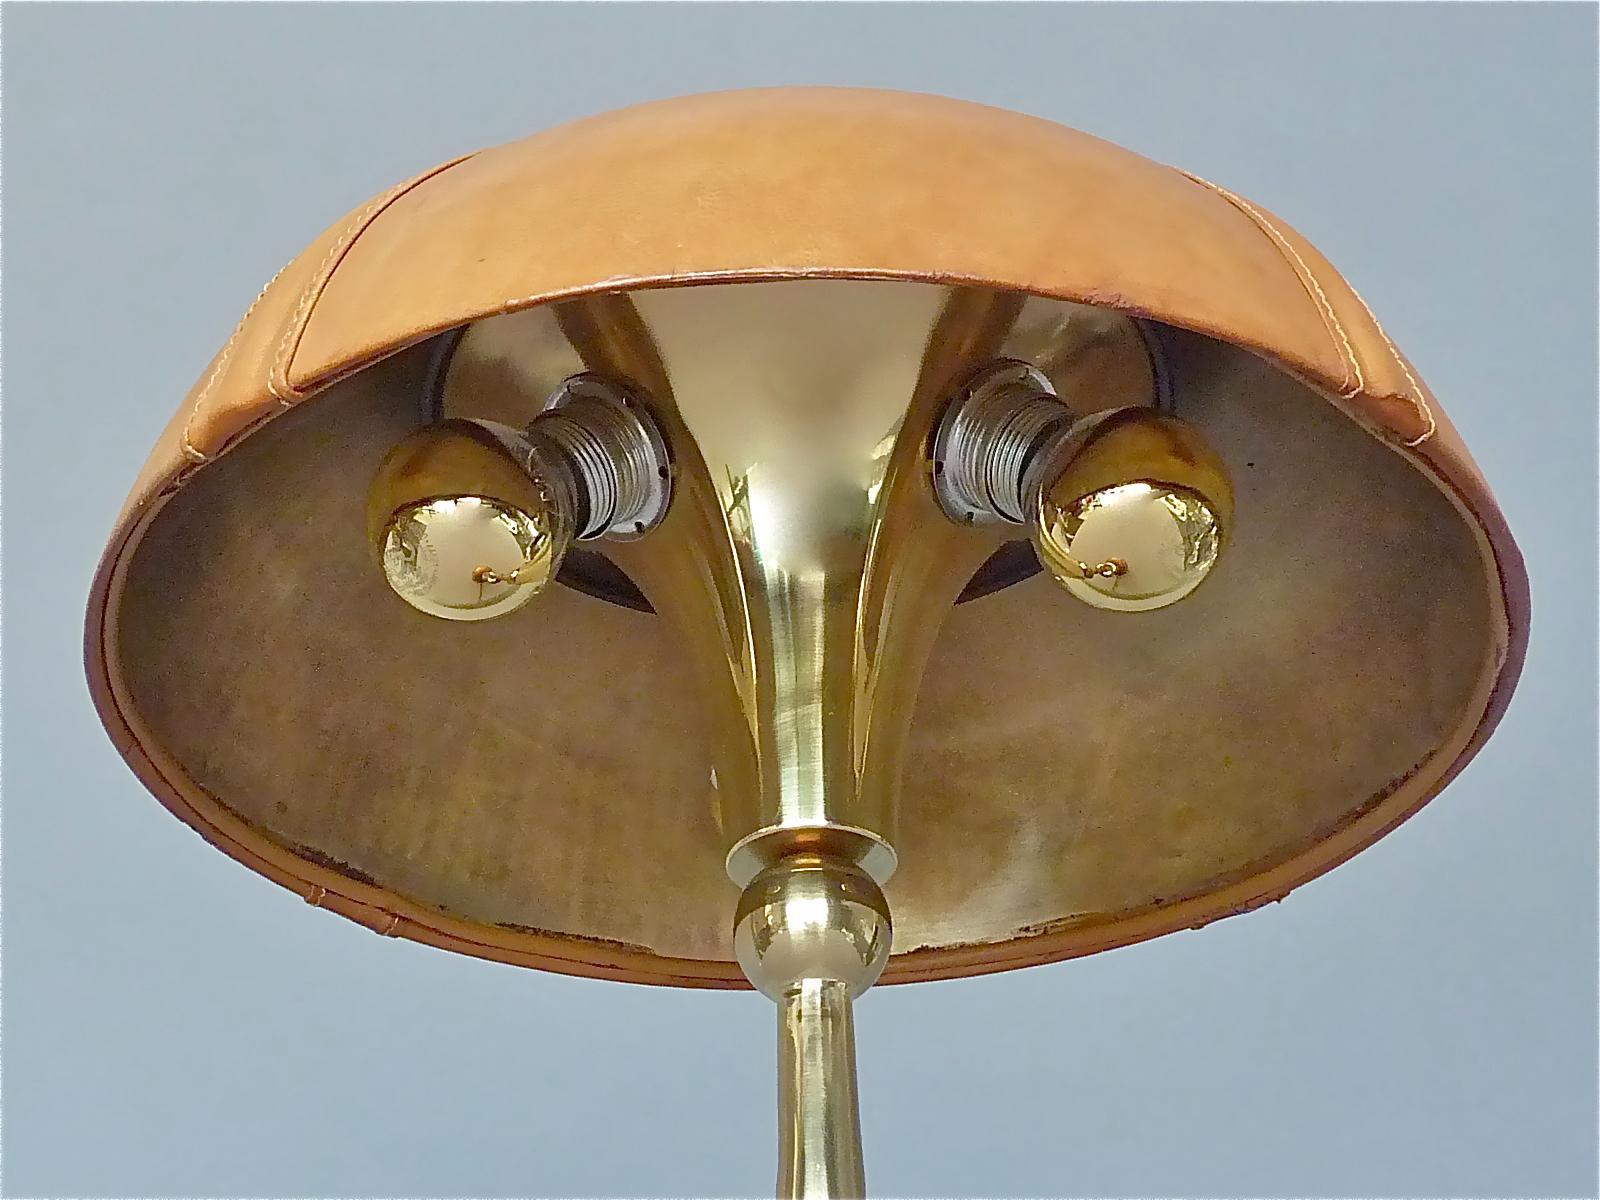 Sculptural Gilt Bronze Leather Knotted Table Lamp French 1970s Jansen Pergay Era For Sale 5